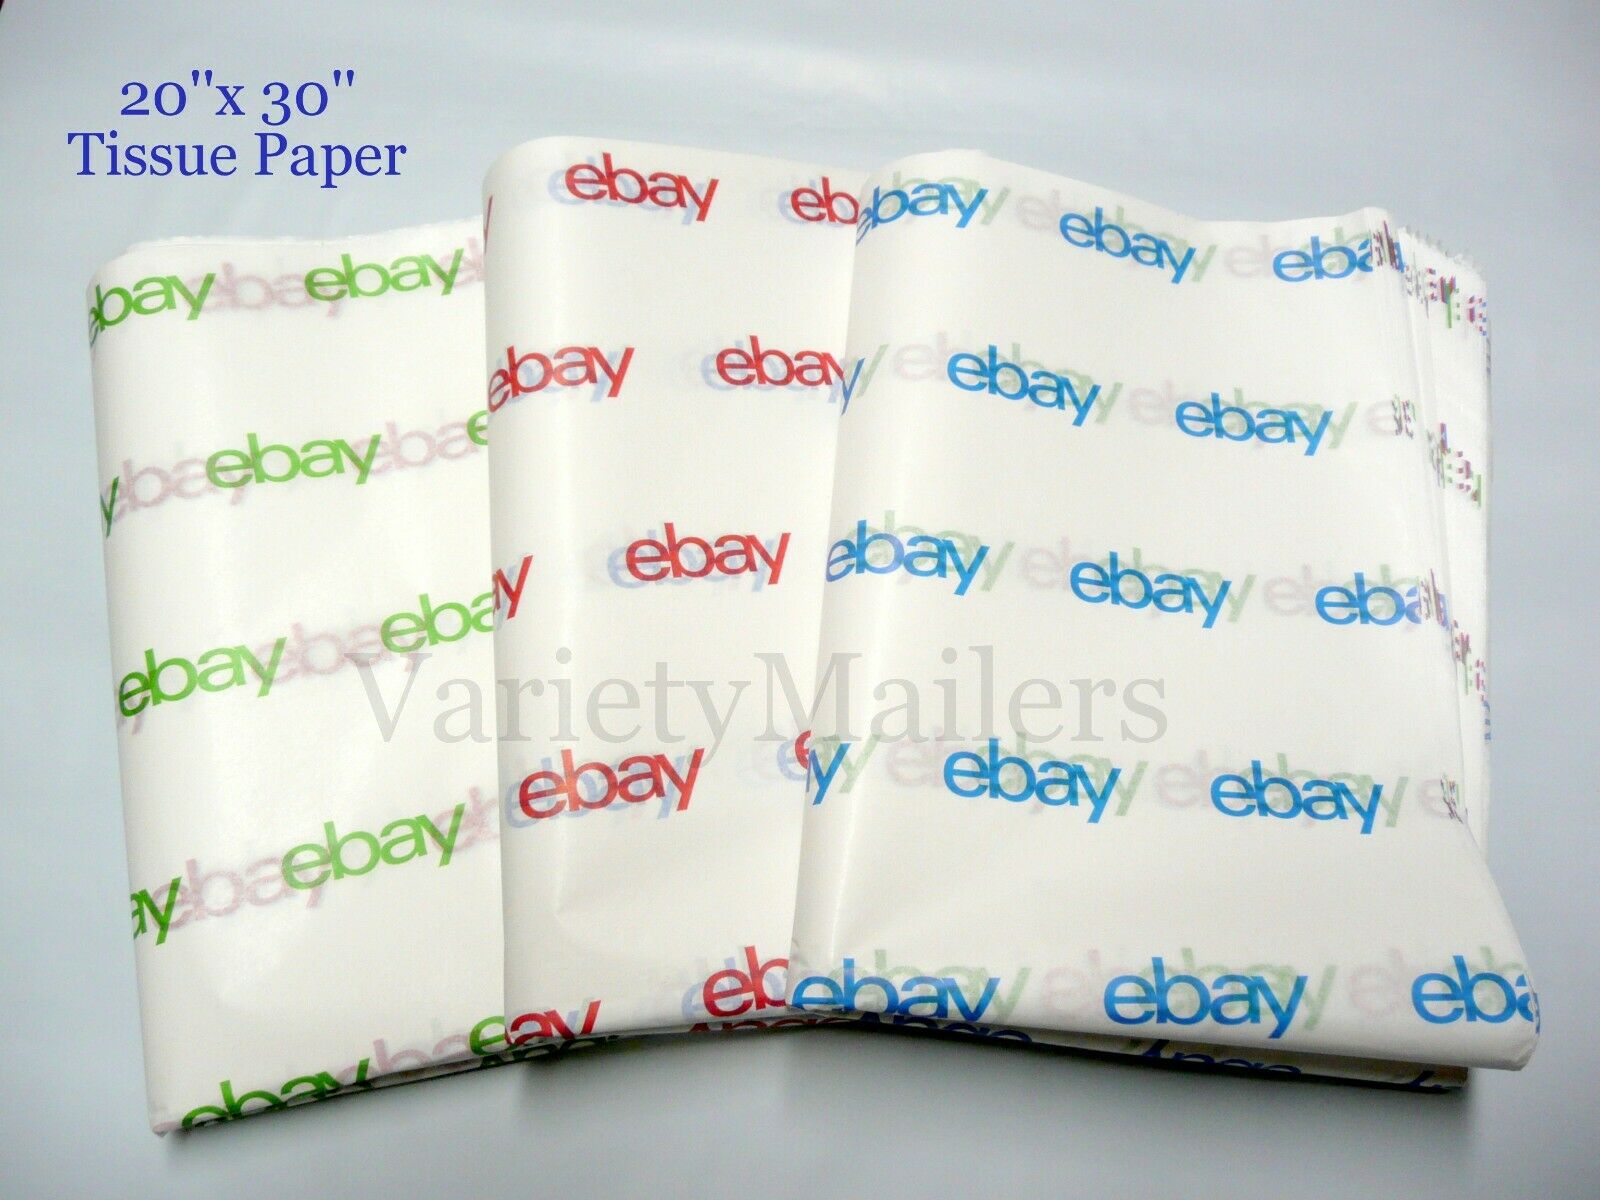 25 Large Sheets Of 20"x 30" Ebay Branded Tissue Paper ~ Free Shipping!